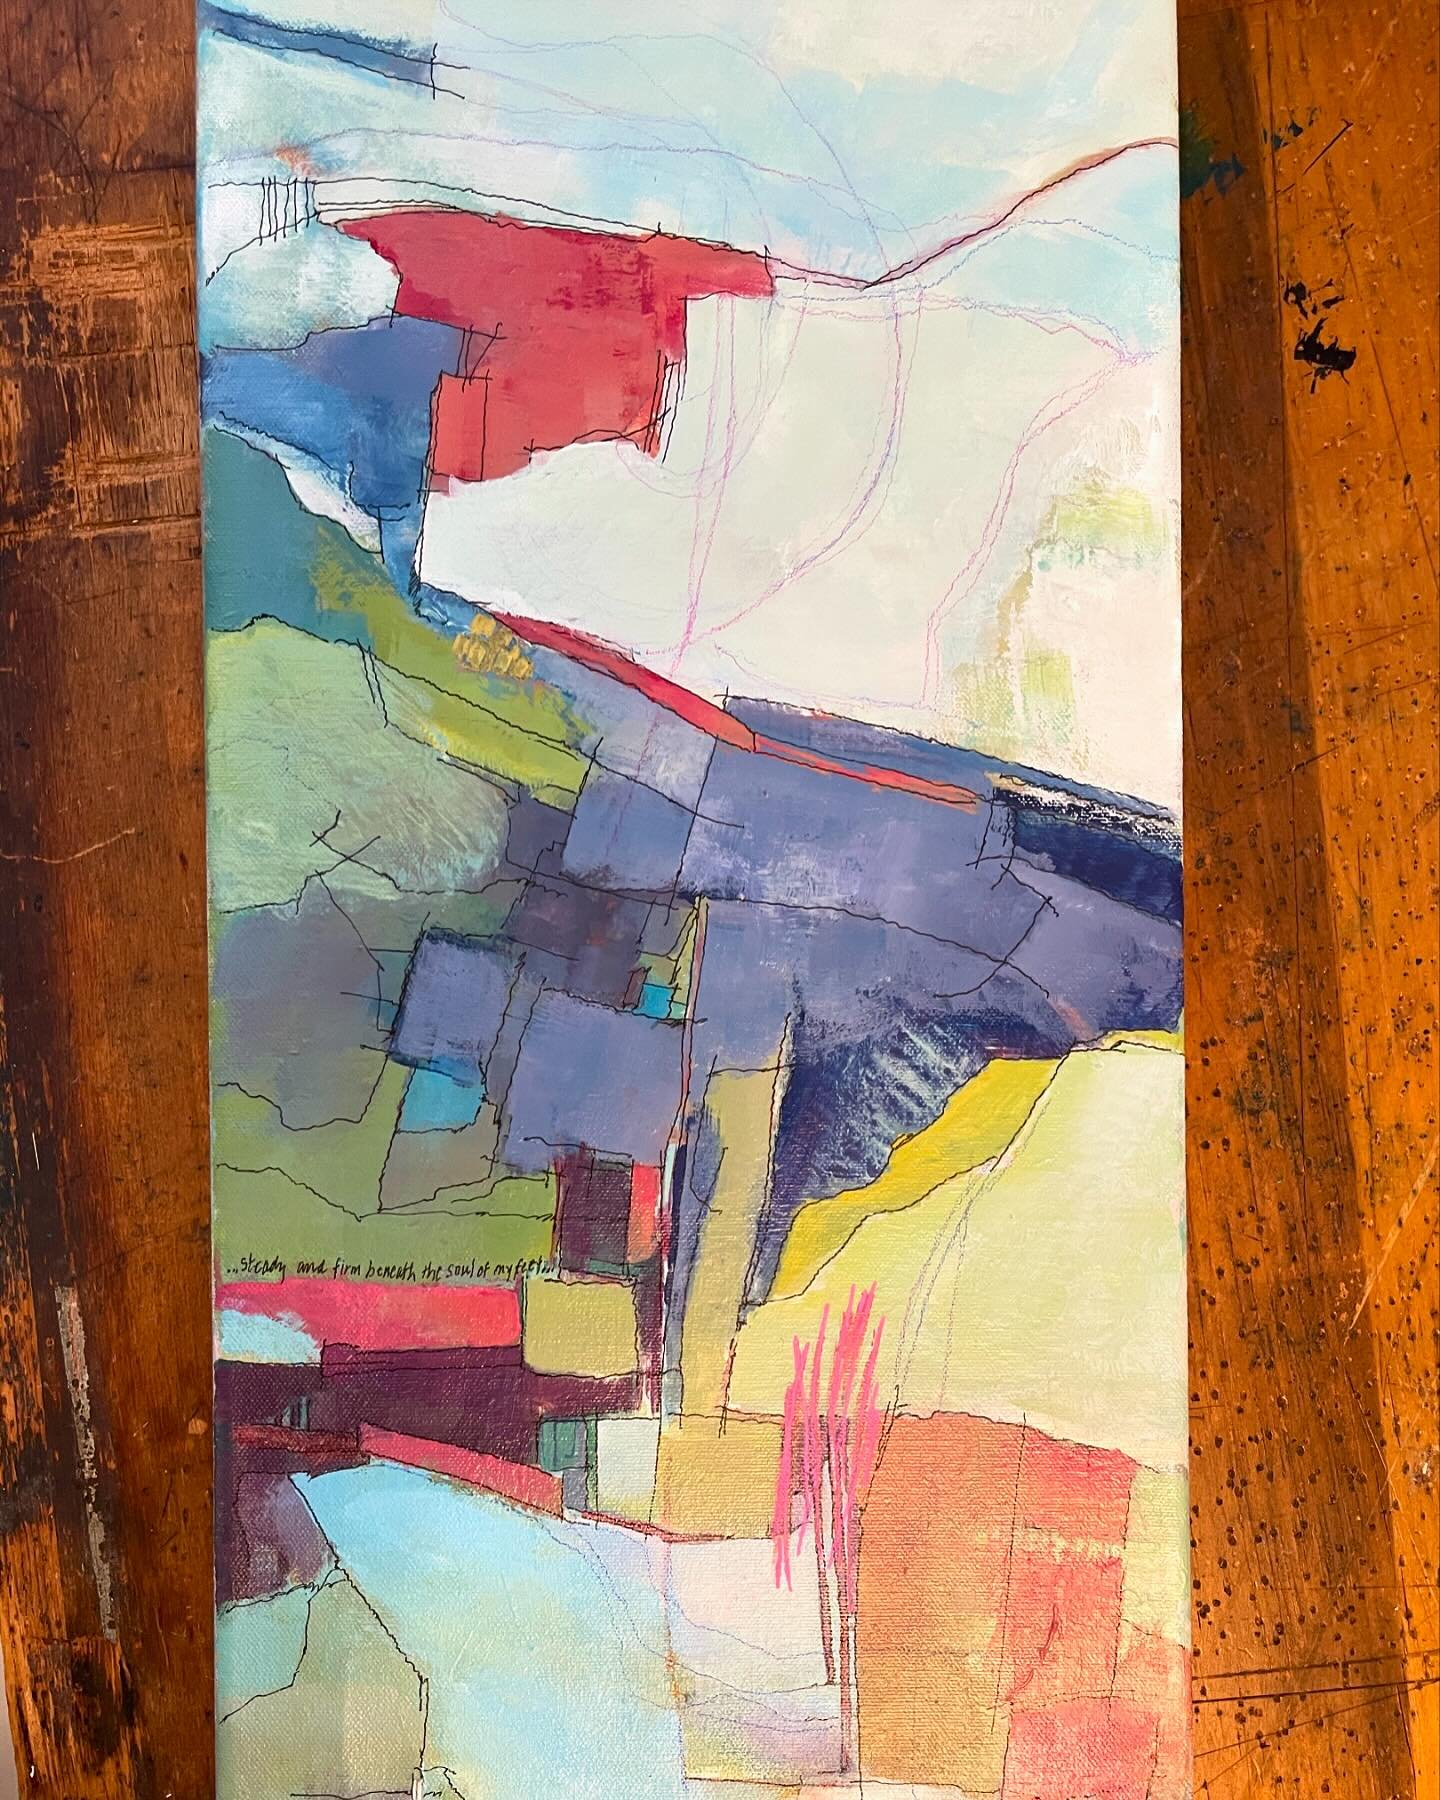 &hellip;.titled &ldquo;Step Aside&rdquo; 10x20&rdquo;&hellip;another reworked piece &hellip;always fun to let loose and see where things go, try a new direction&hellip;with no plan, no expectations. 
#artplay #colourfulart #colourfulabstract #colling